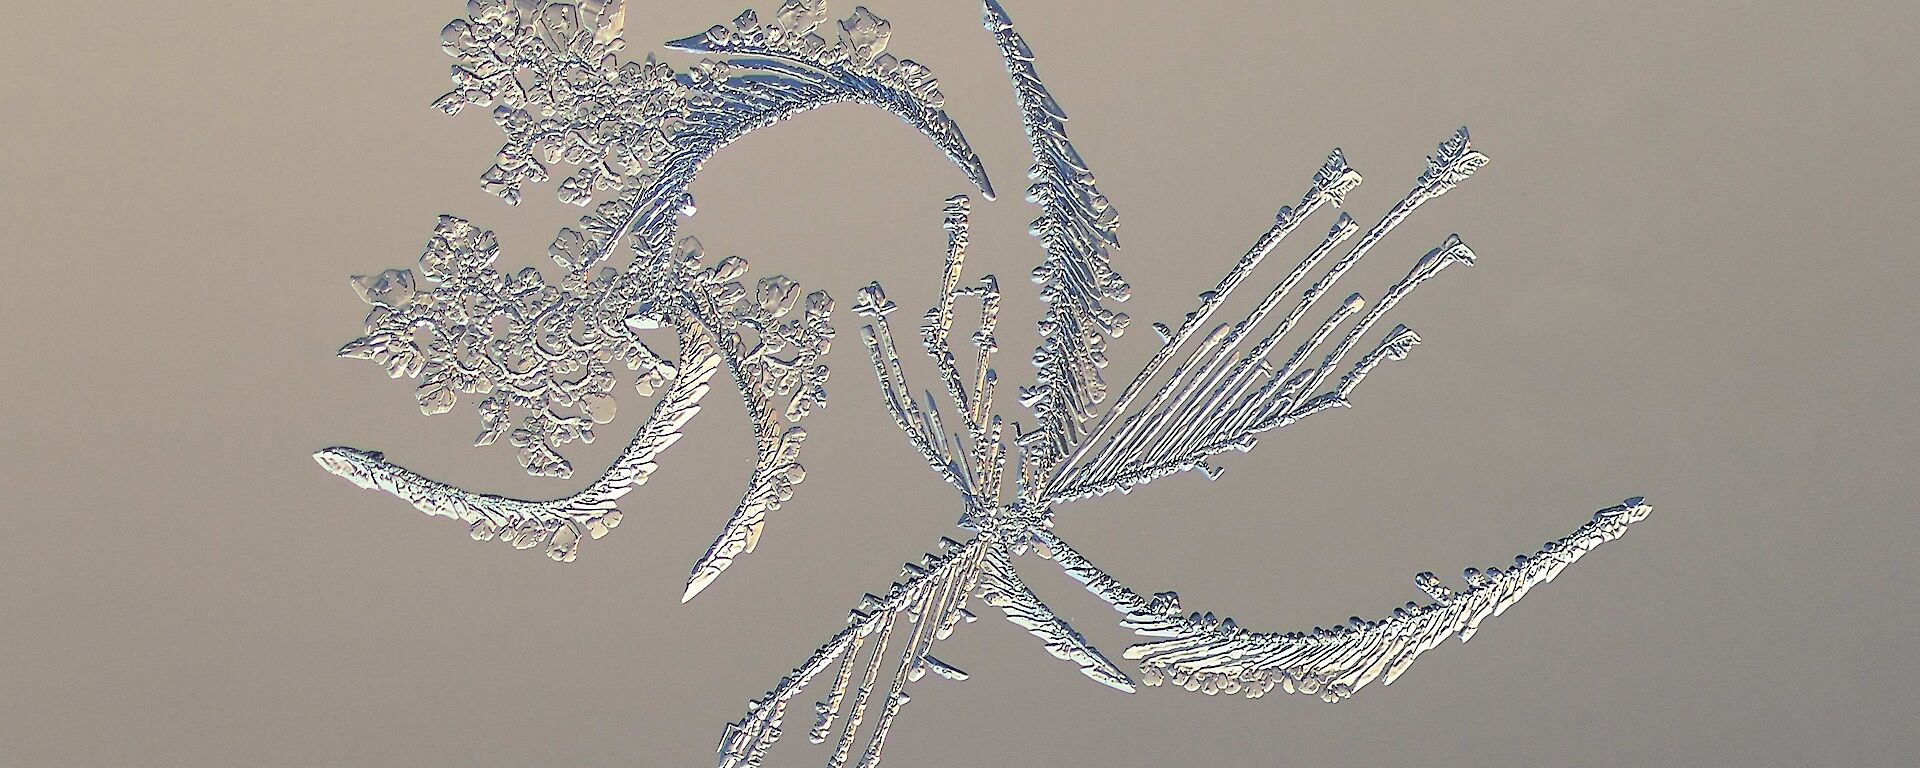 Ice crystals formed on glass in the shape of a flower